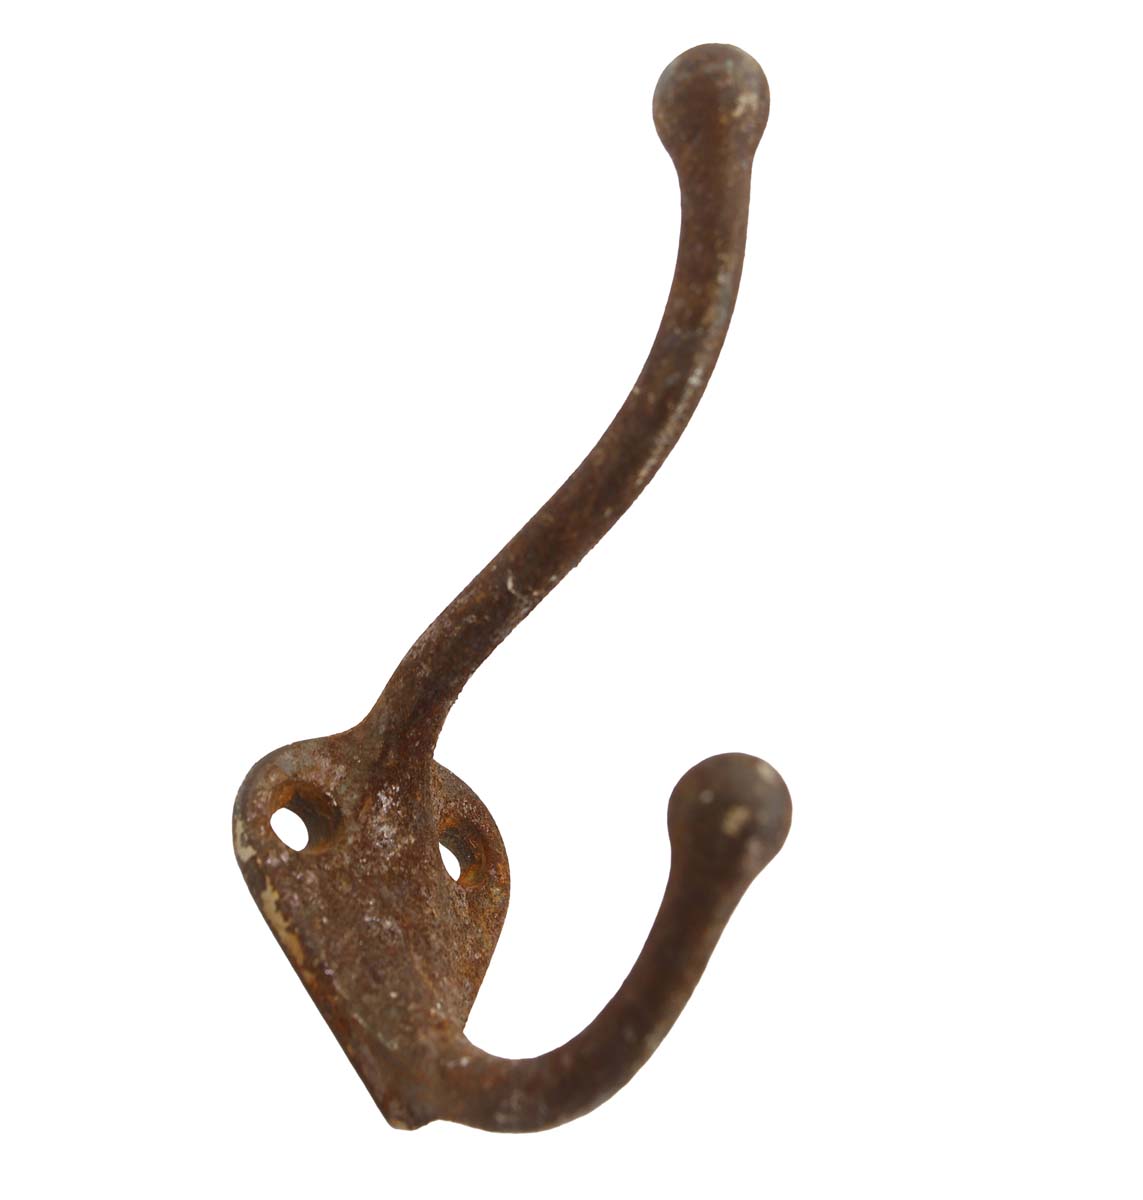 https://ogtstore.com/wp-content/uploads/2022/07/single-hooks-cast-iron-triple-arm-wall-hook-with-rusted-patina-q276764.jpg